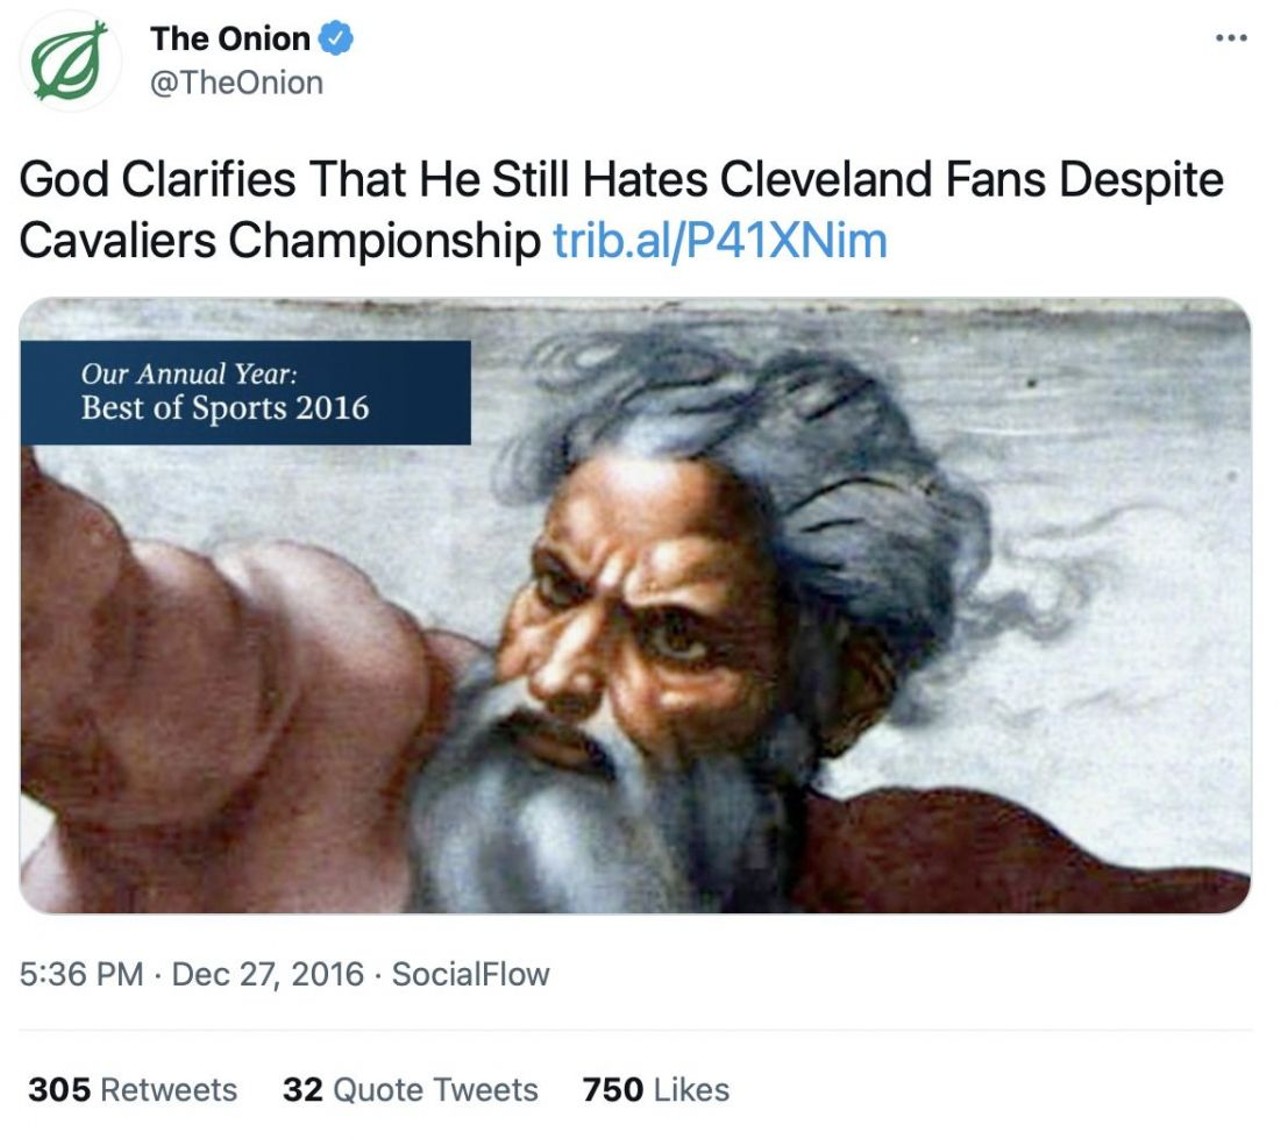  God Clarifies That He Still Hates Cleveland Fans Despite Cavaliers Championship
&#147;&#145;I just figured that enough is enough, so I decided to throw them a bone and finally give them a title, but believe me, I still can&#146;t stand Cleveland teams or their fans,&#148; said the Lord&#148;.